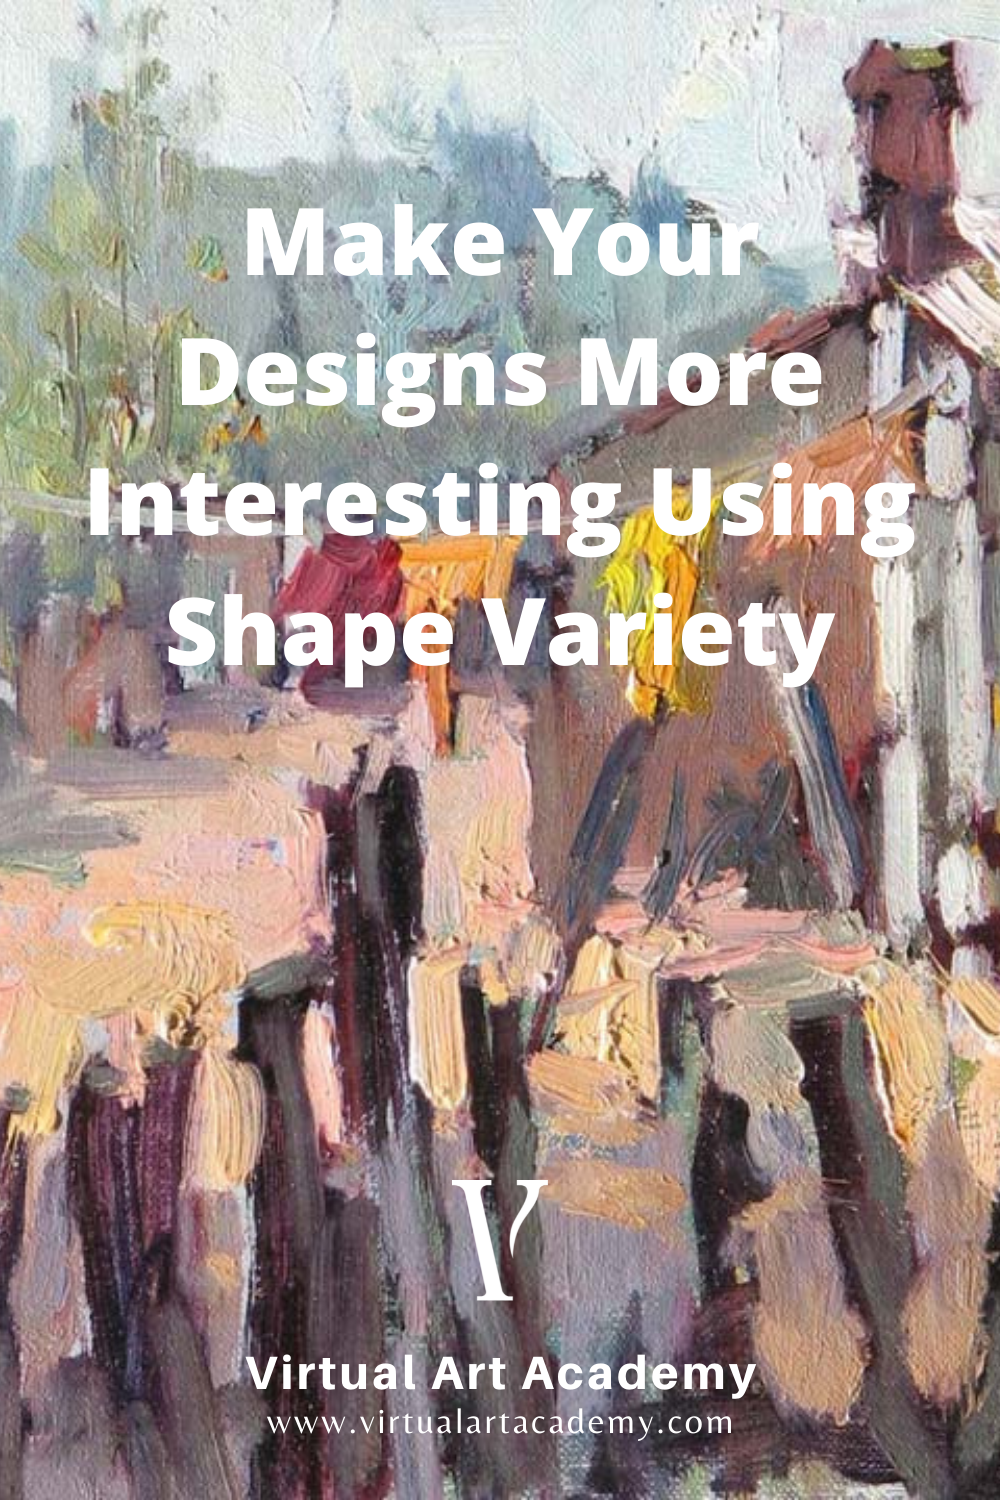 Make Your Designs More Interesting Using Shape Variety